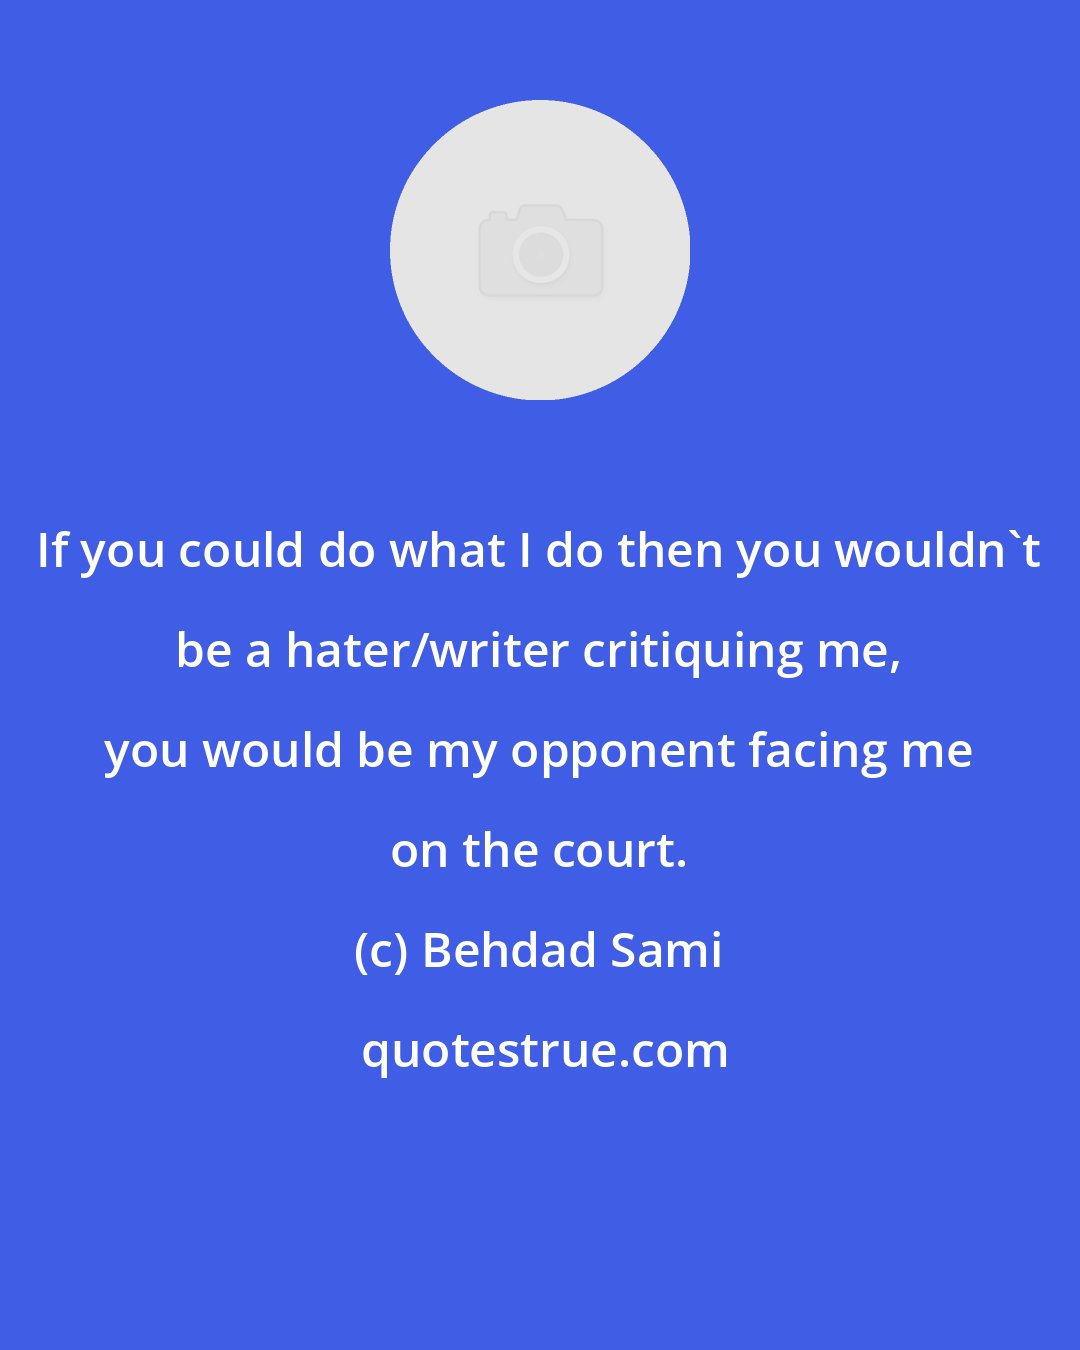 Behdad Sami: If you could do what I do then you wouldn't be a hater/writer critiquing me, you would be my opponent facing me on the court.